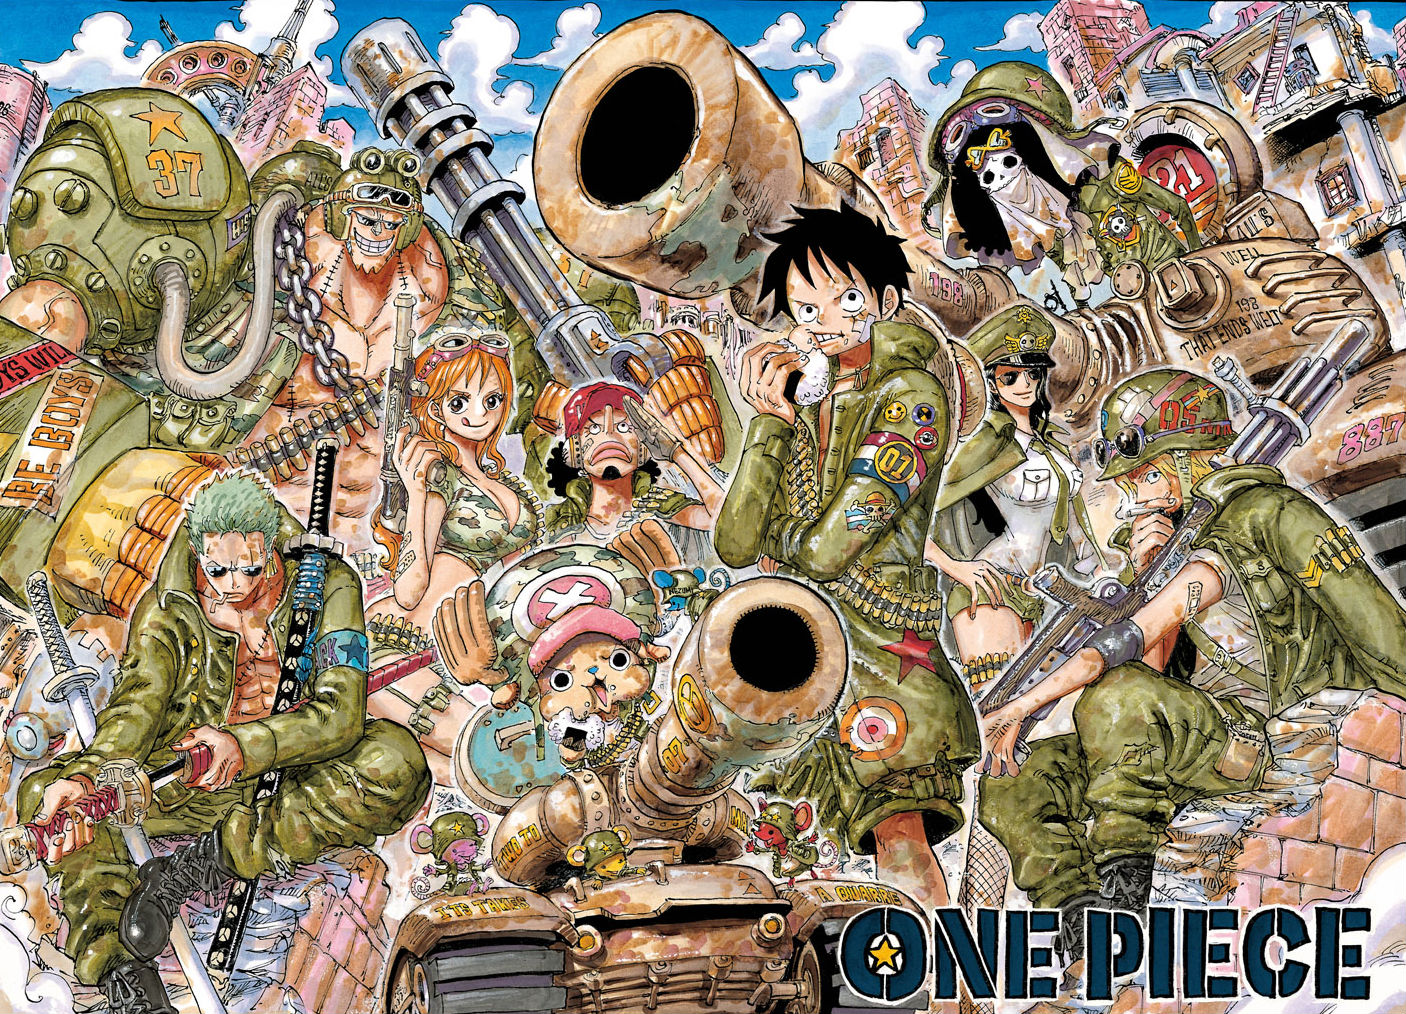 One Piece Manga Artist Says The Series Will Span Just Over 100 Volumes